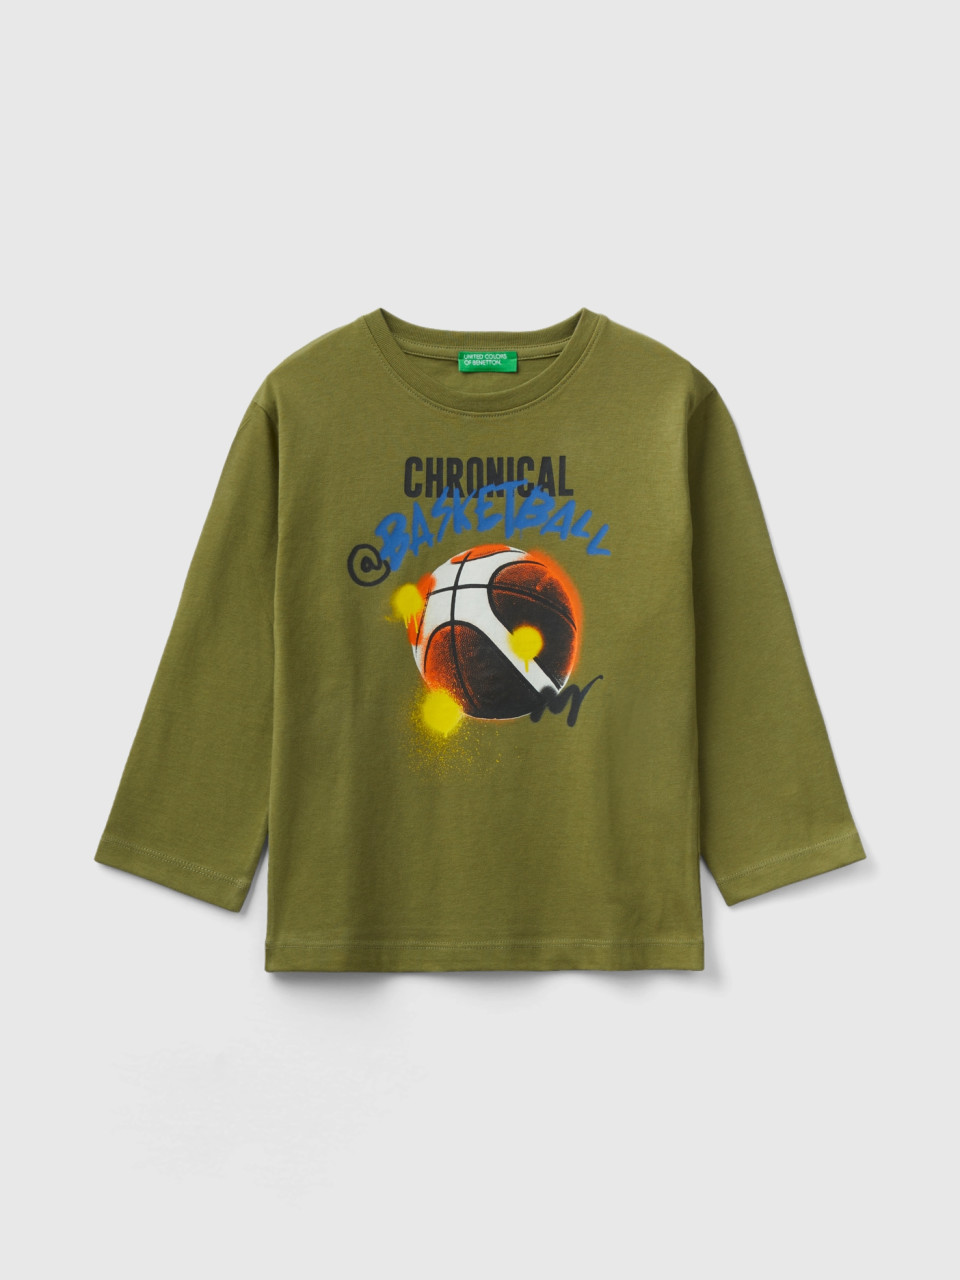 Benetton, Crew Neck T-shirt With Print, Military Green, Kids